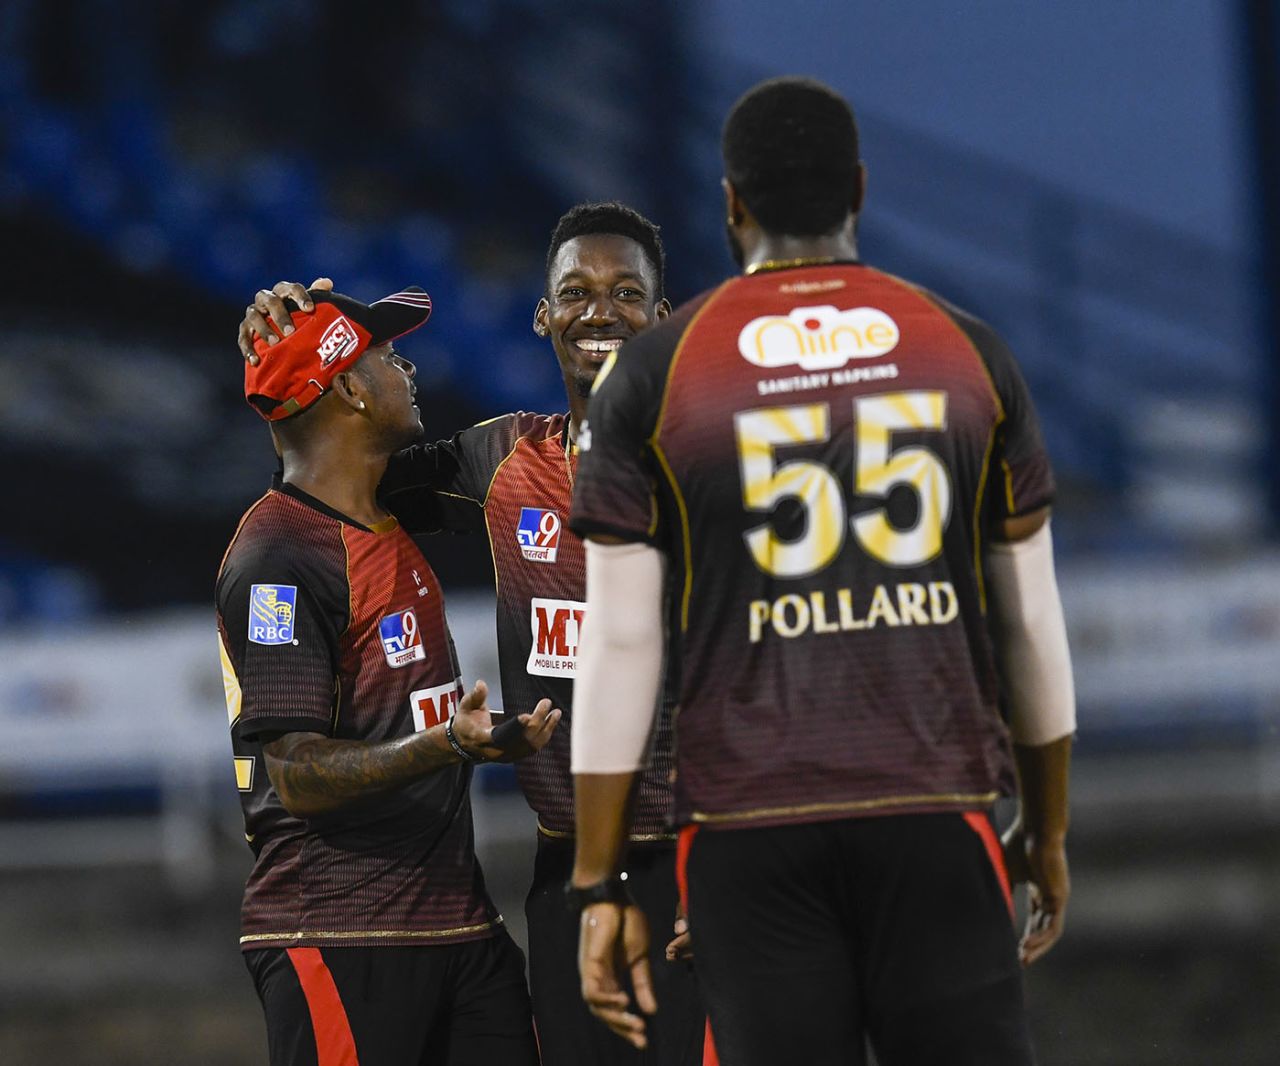 Khary Pierre celebrates a breakthrough with Tion Webster and Kieron Pollard, Trinbago Knight Riders v Guyana Amazon Warriors, Port-of-Spain, CPL, August 27, 2020